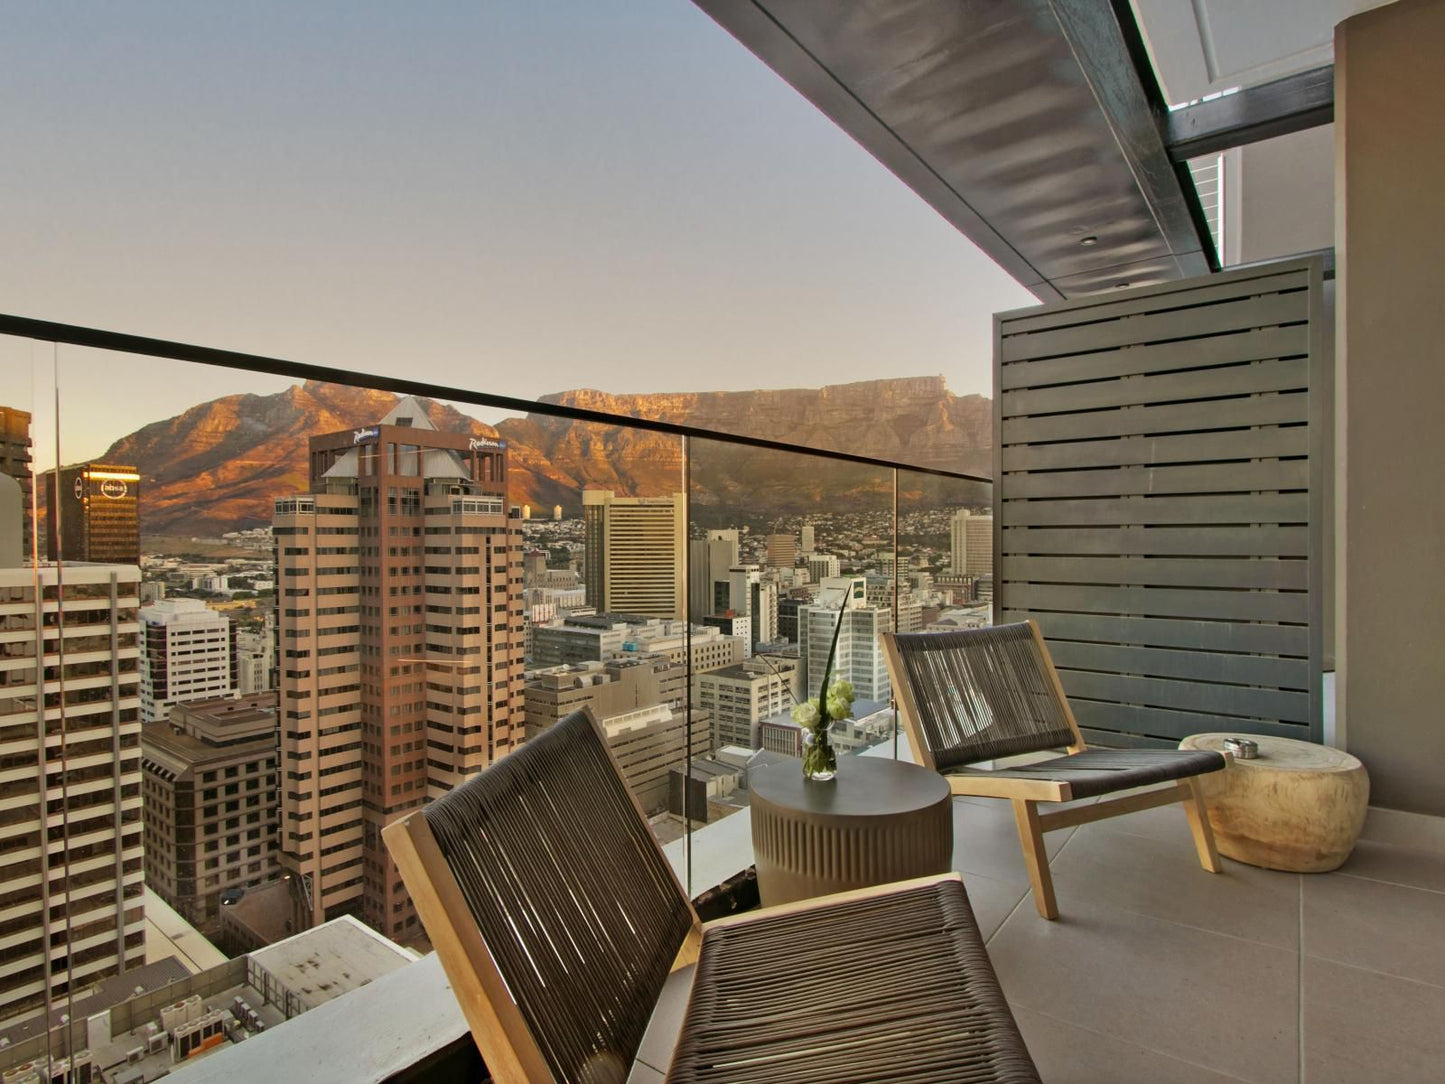 16 On Bree Unit 2810 By Hostagents De Waterkant Cape Town Western Cape South Africa Balcony, Architecture